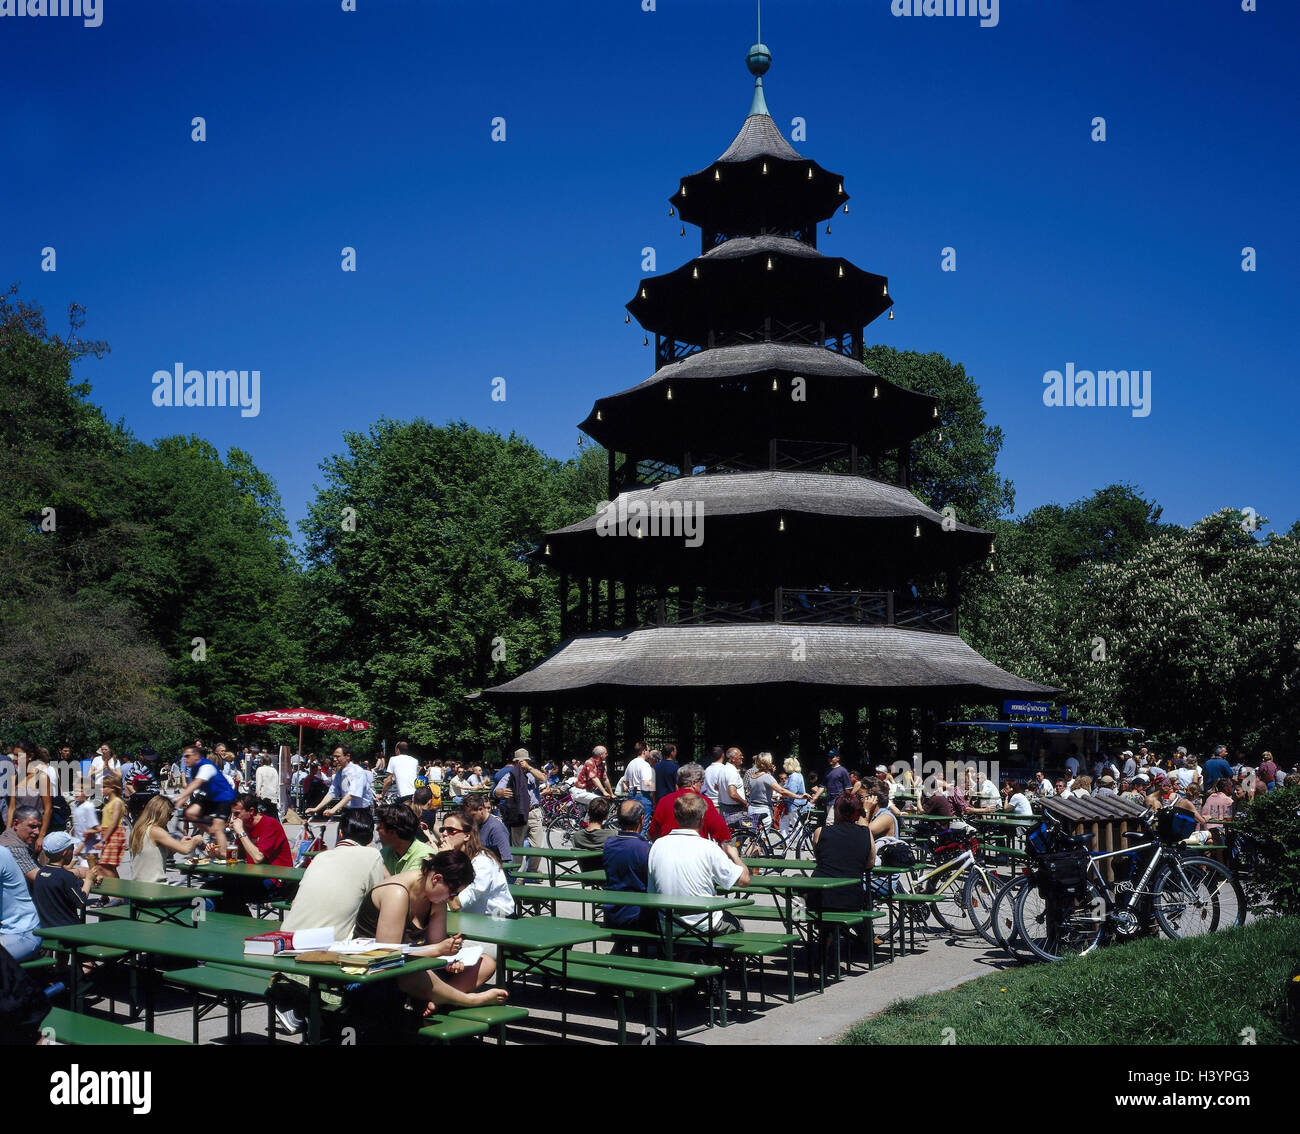 Germany, Upper Bavaria, Munich, English garden, Chinese tower, beer garden, guests, outside, Bavaria, state capital, park, park, in Chinese, structure, building, place of interest, landmark, seat opportunities, restaurant, entertainment, guests Stock Photo